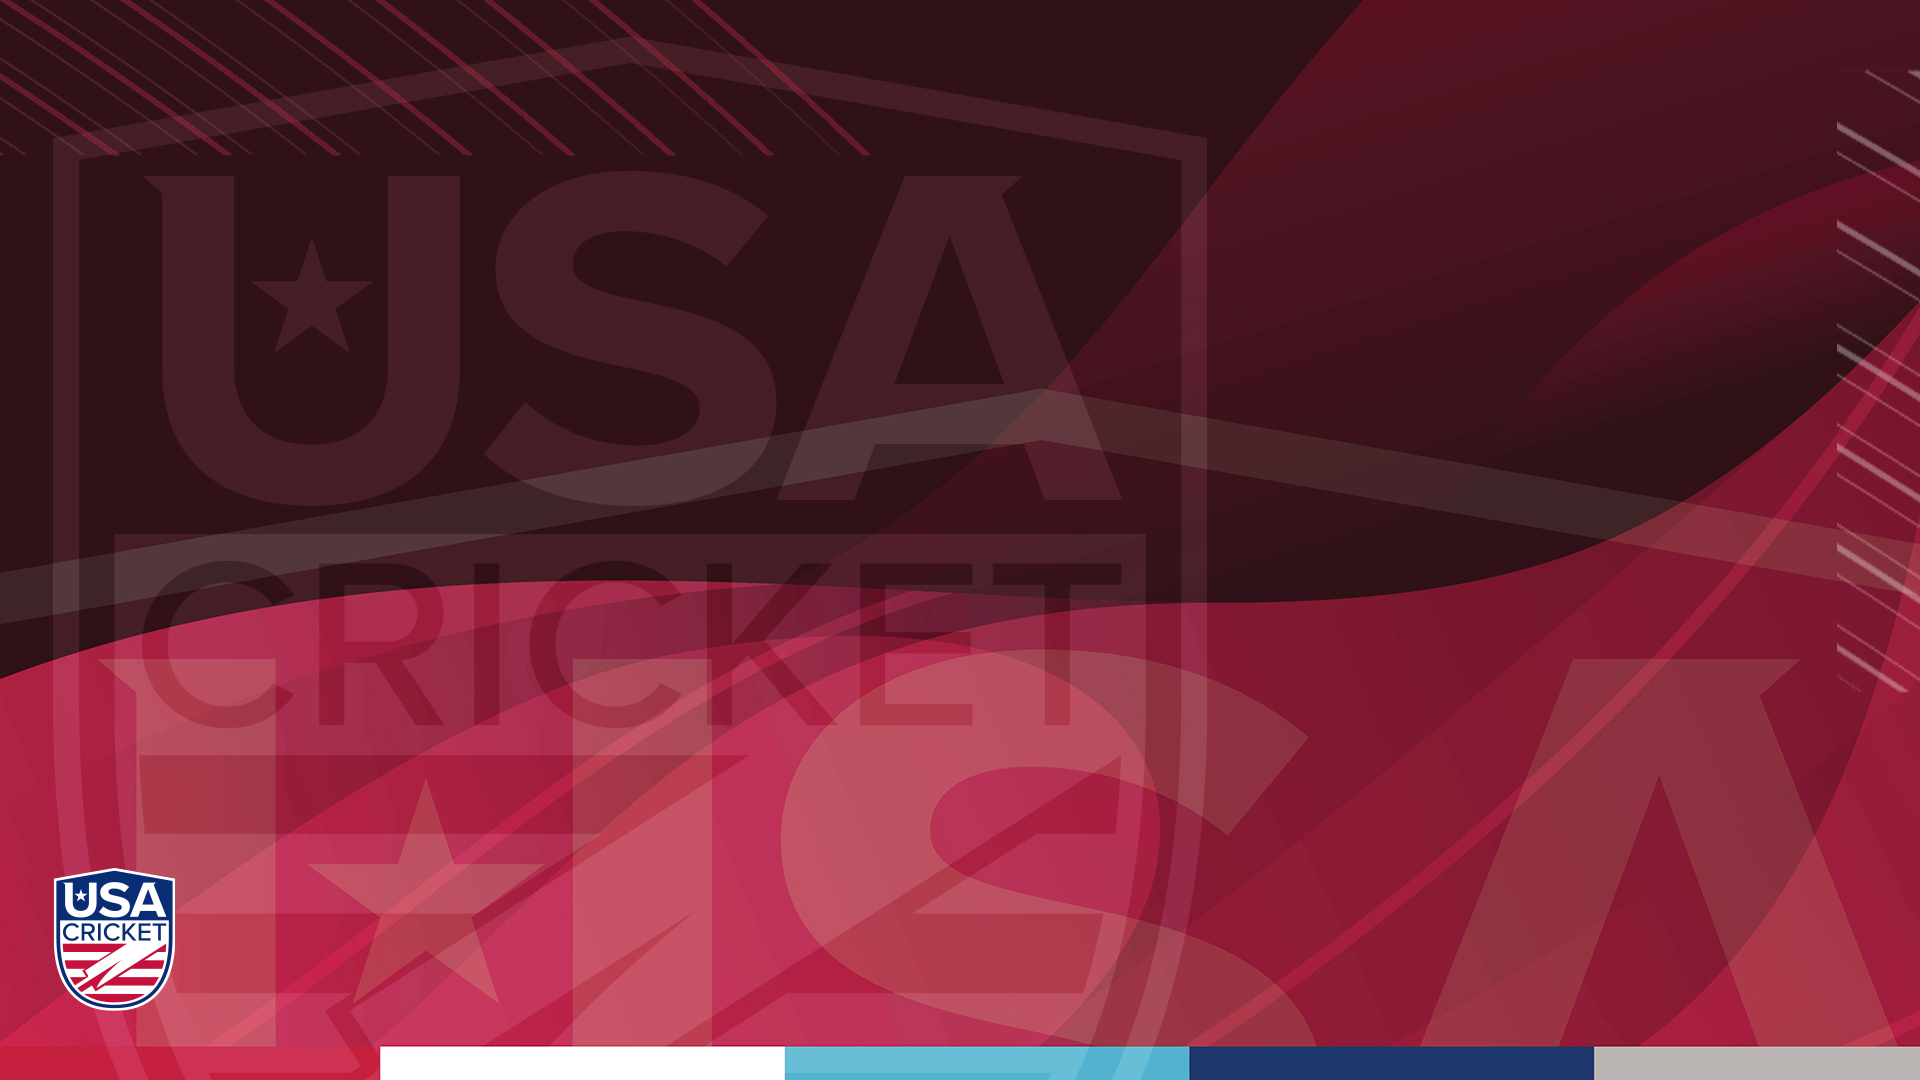 USA Cricket wishes to ANNOUNCE CALL FOR APPLICATIONS FOR AN INDIVIDUAL DIRECTOR IN THE 2023 ELECTIONS